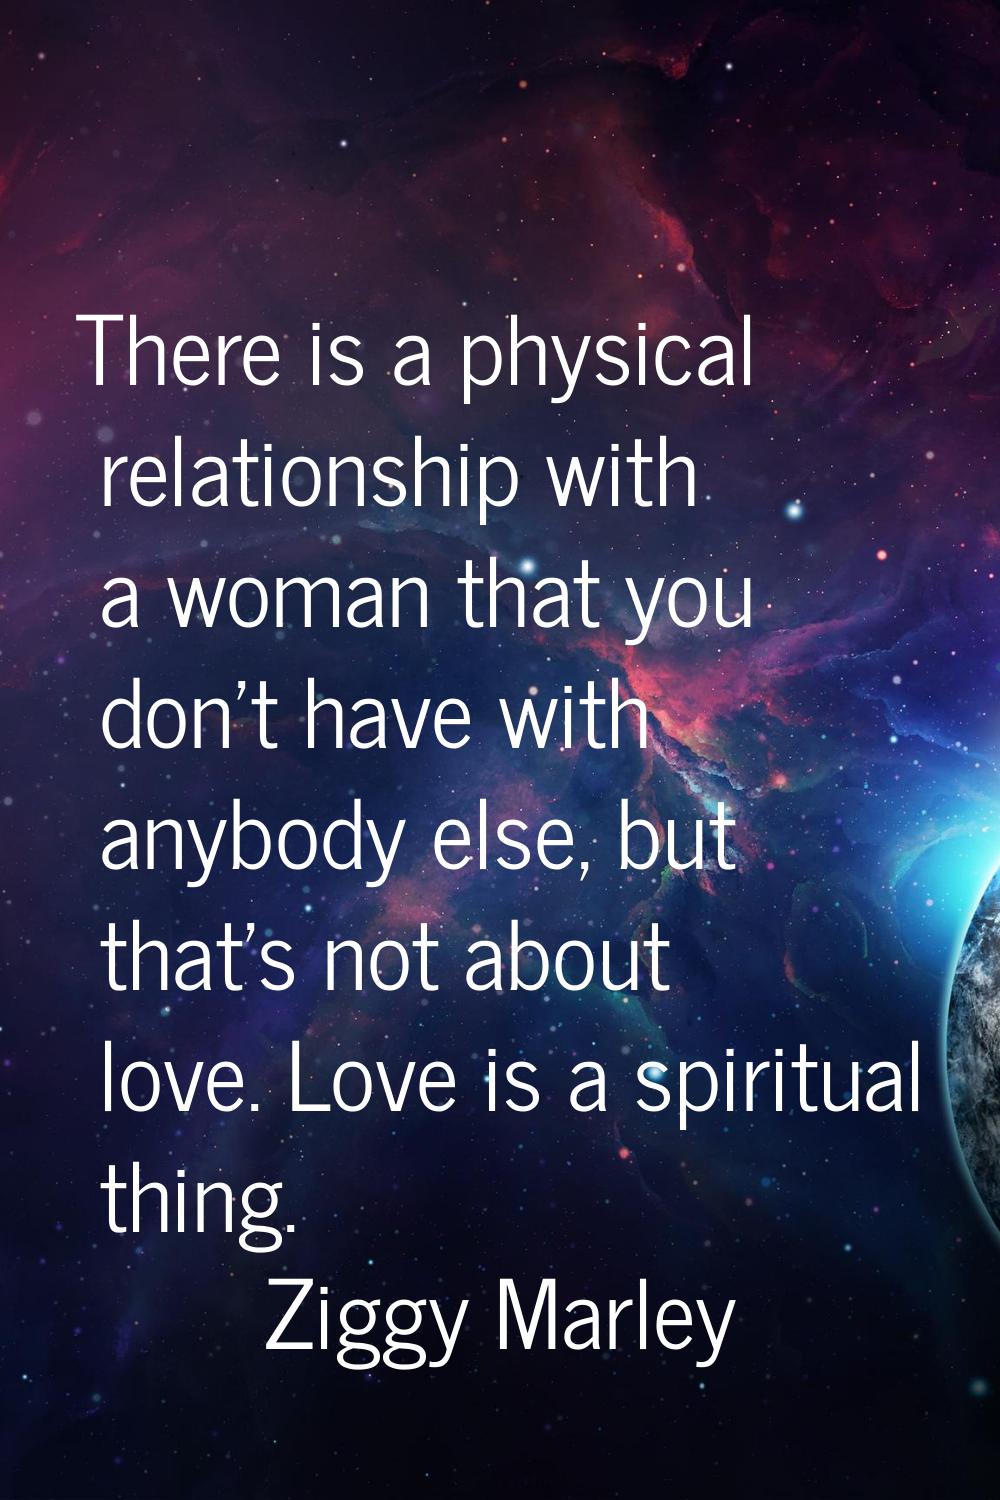 There is a physical relationship with a woman that you don't have with anybody else, but that's not